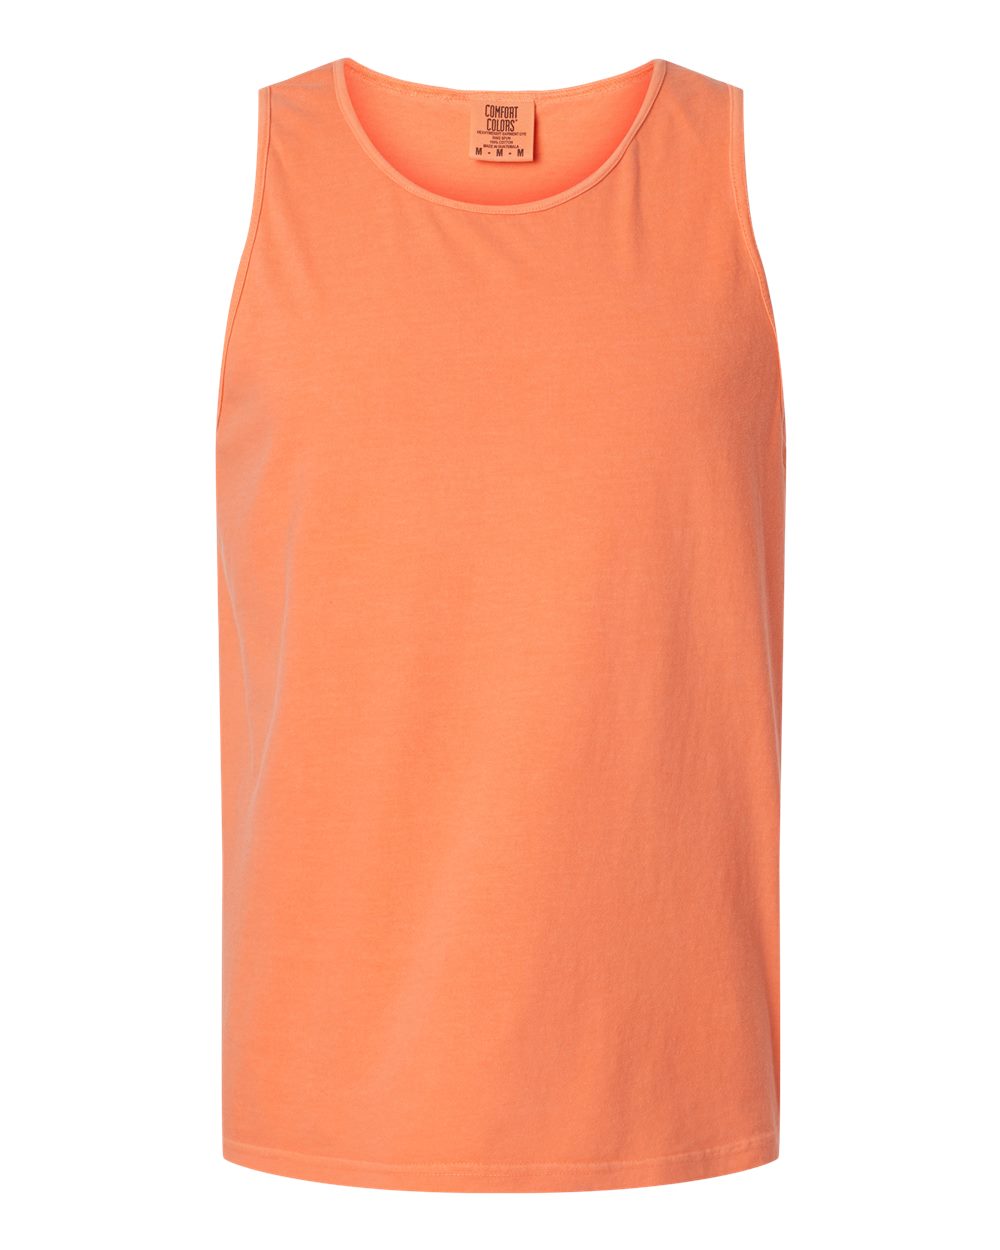 Comfort Colors Garment-Dyed Heavyweight Tank Top